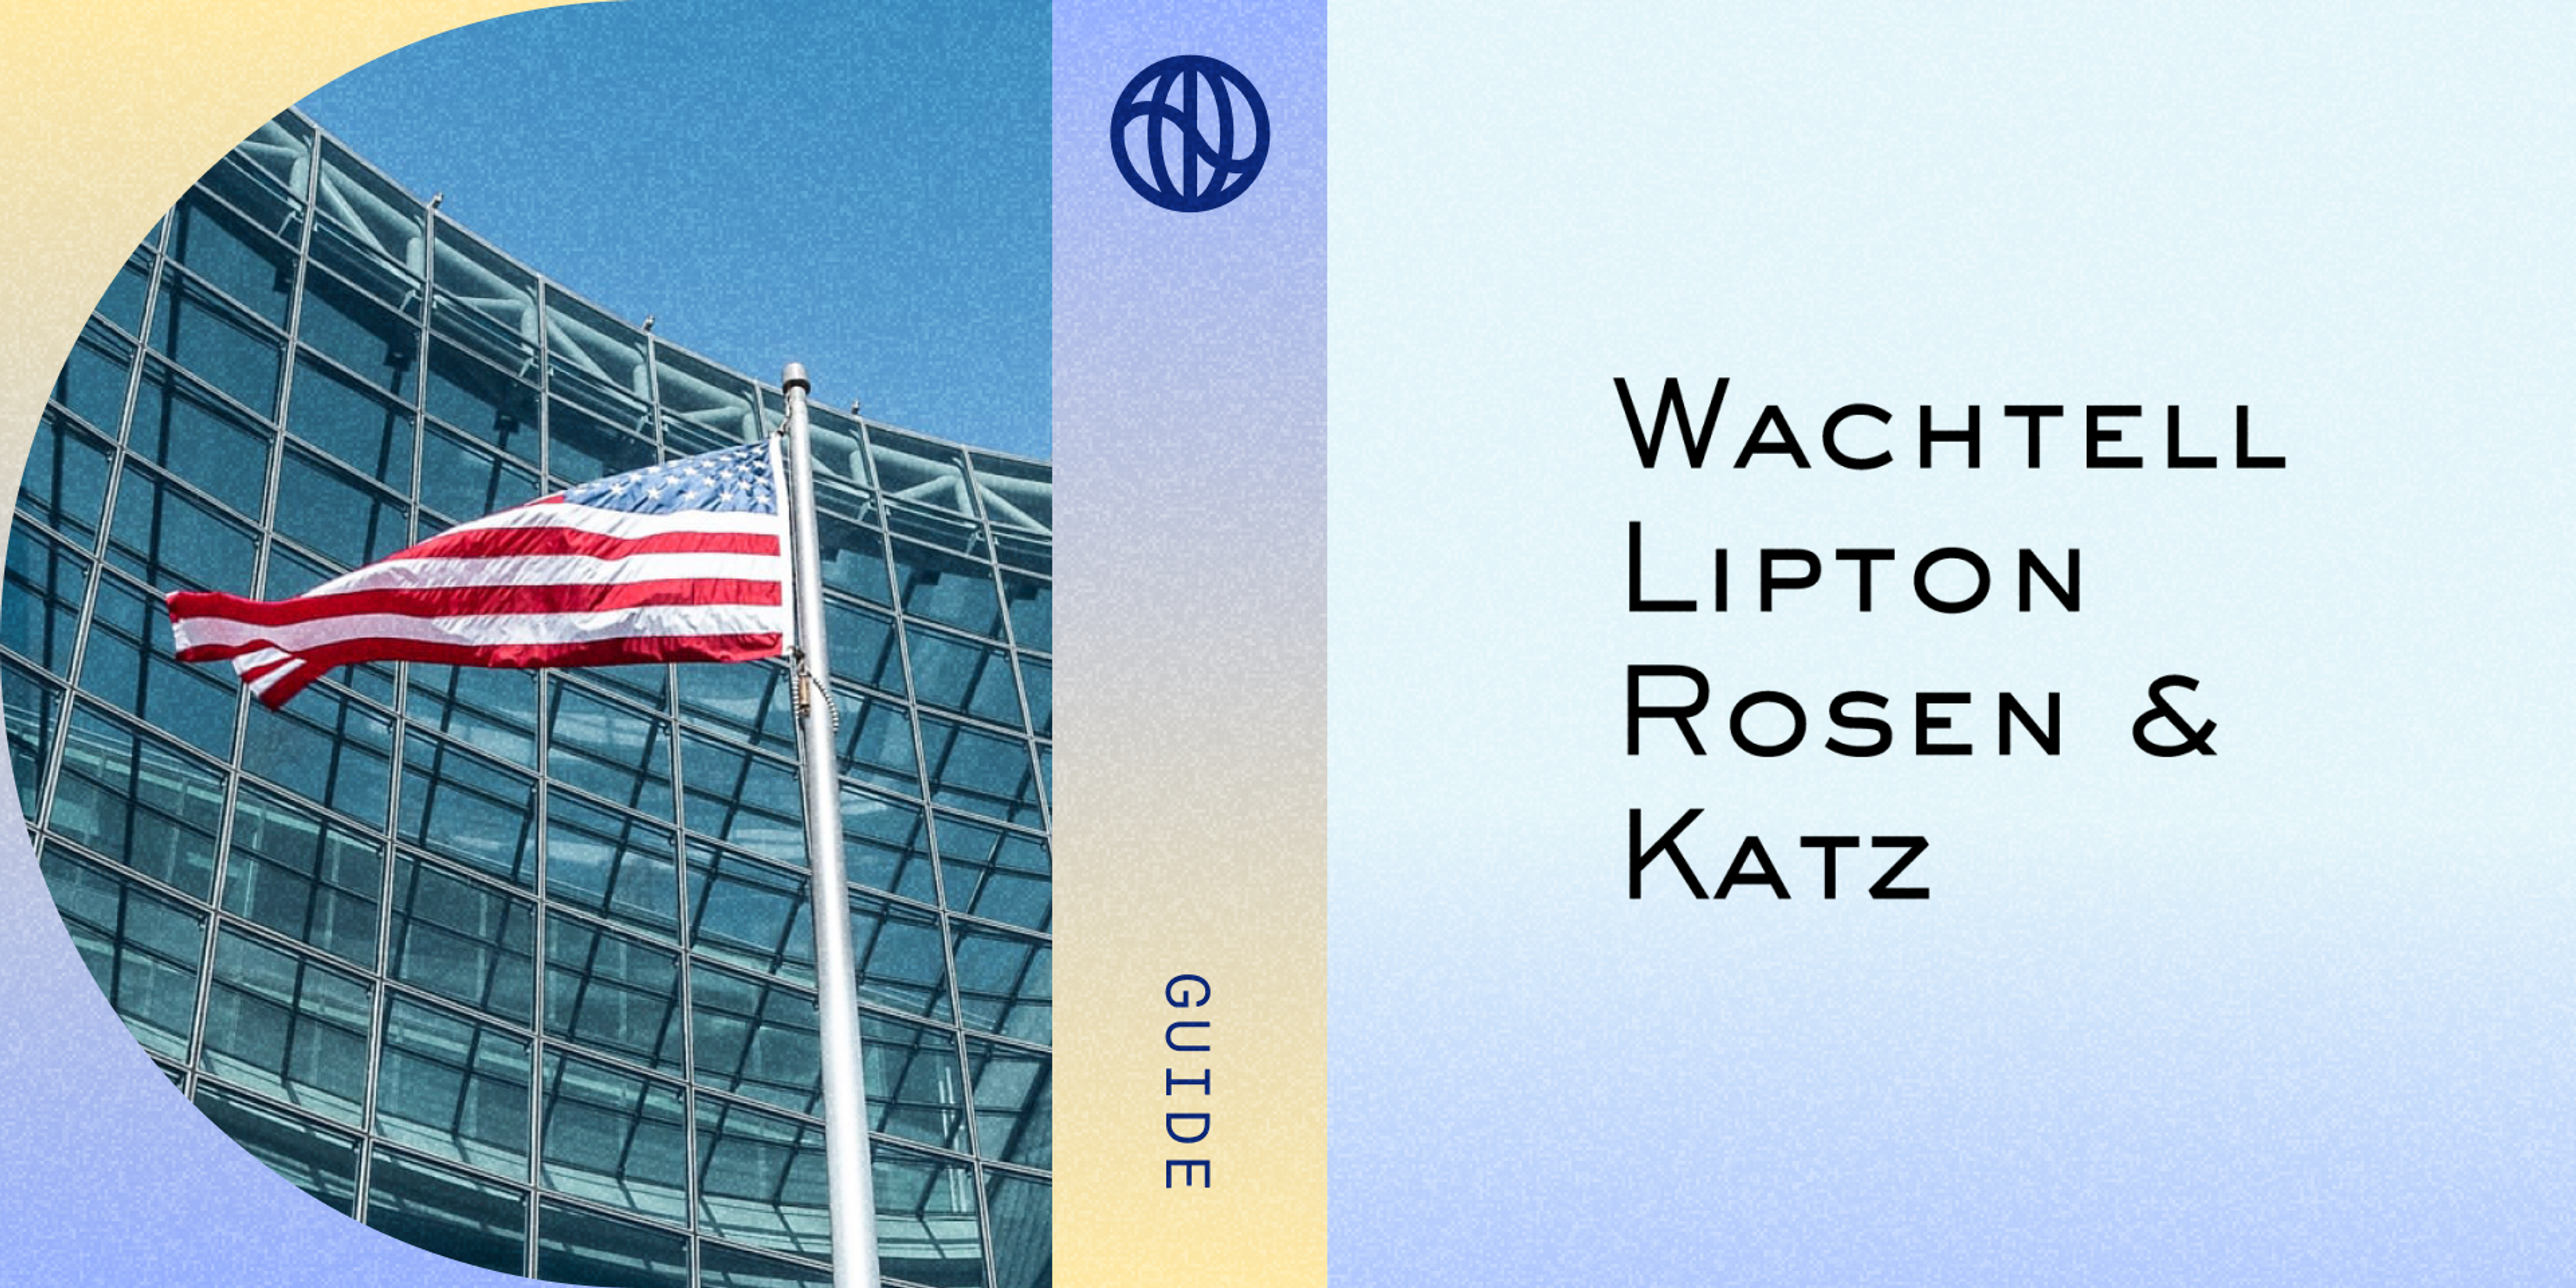 American flag and Wachtell Lipton Rosen & Katz law firm logo for FTC Green Guides